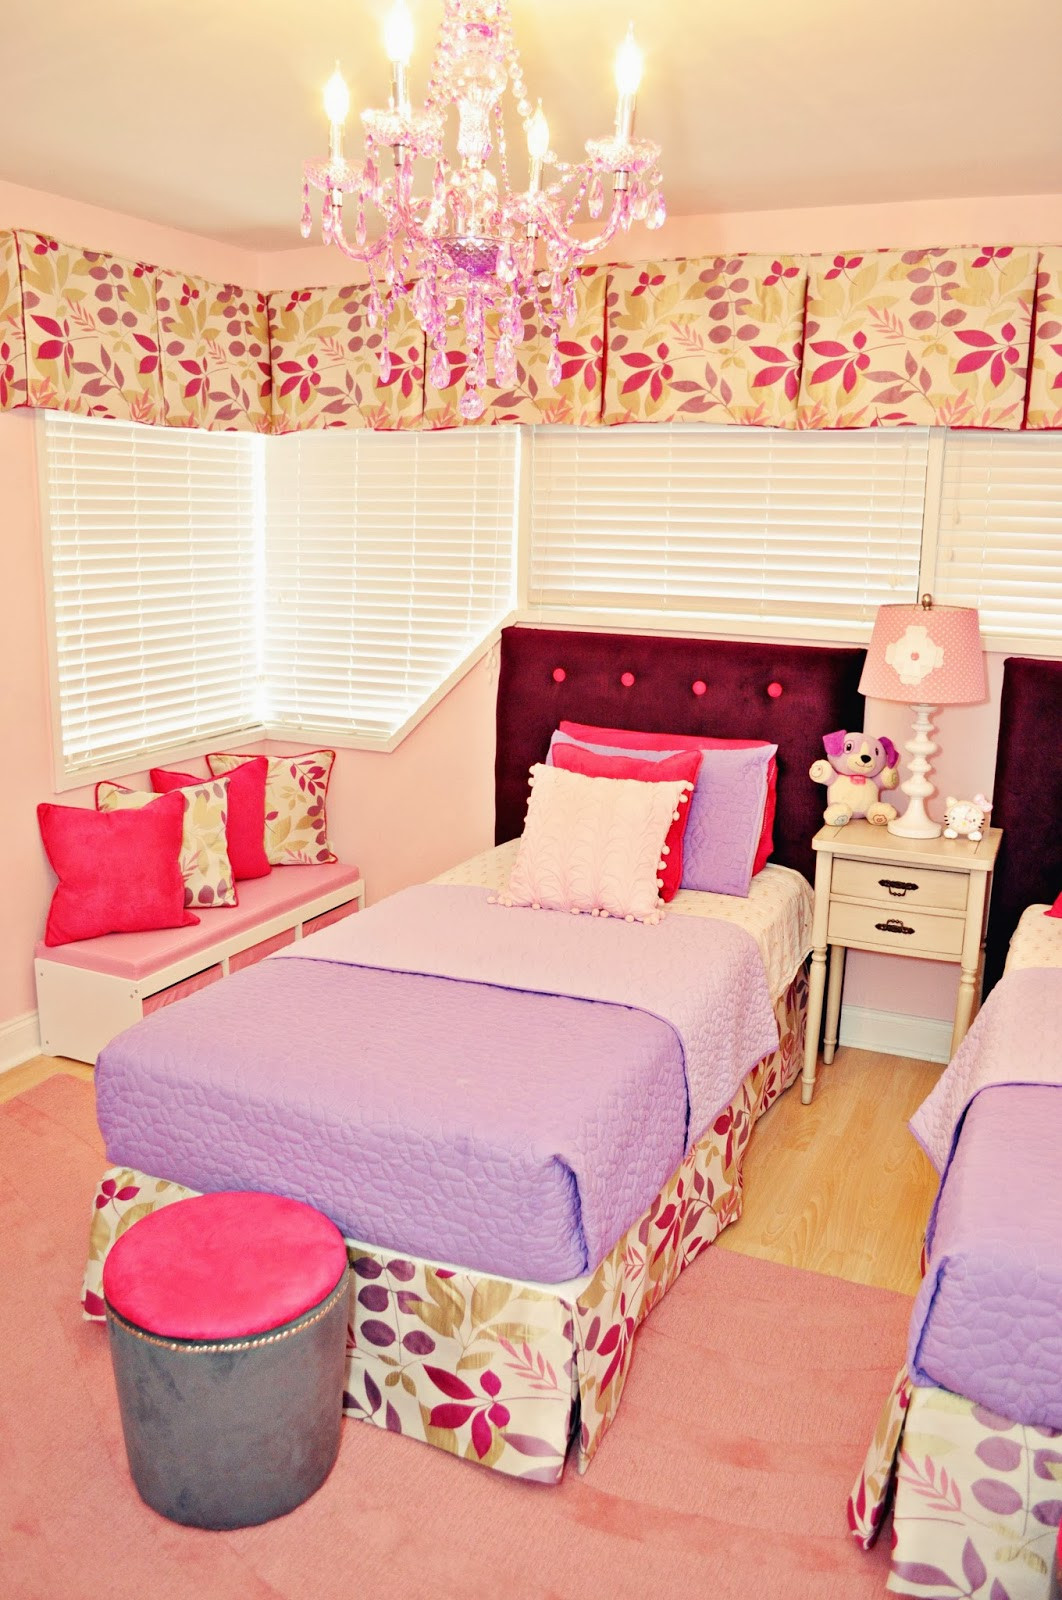 Pink And Purple Kids Room
 Live Laugh Decorate Pink Meets Purple in Our Kids Room Reveal